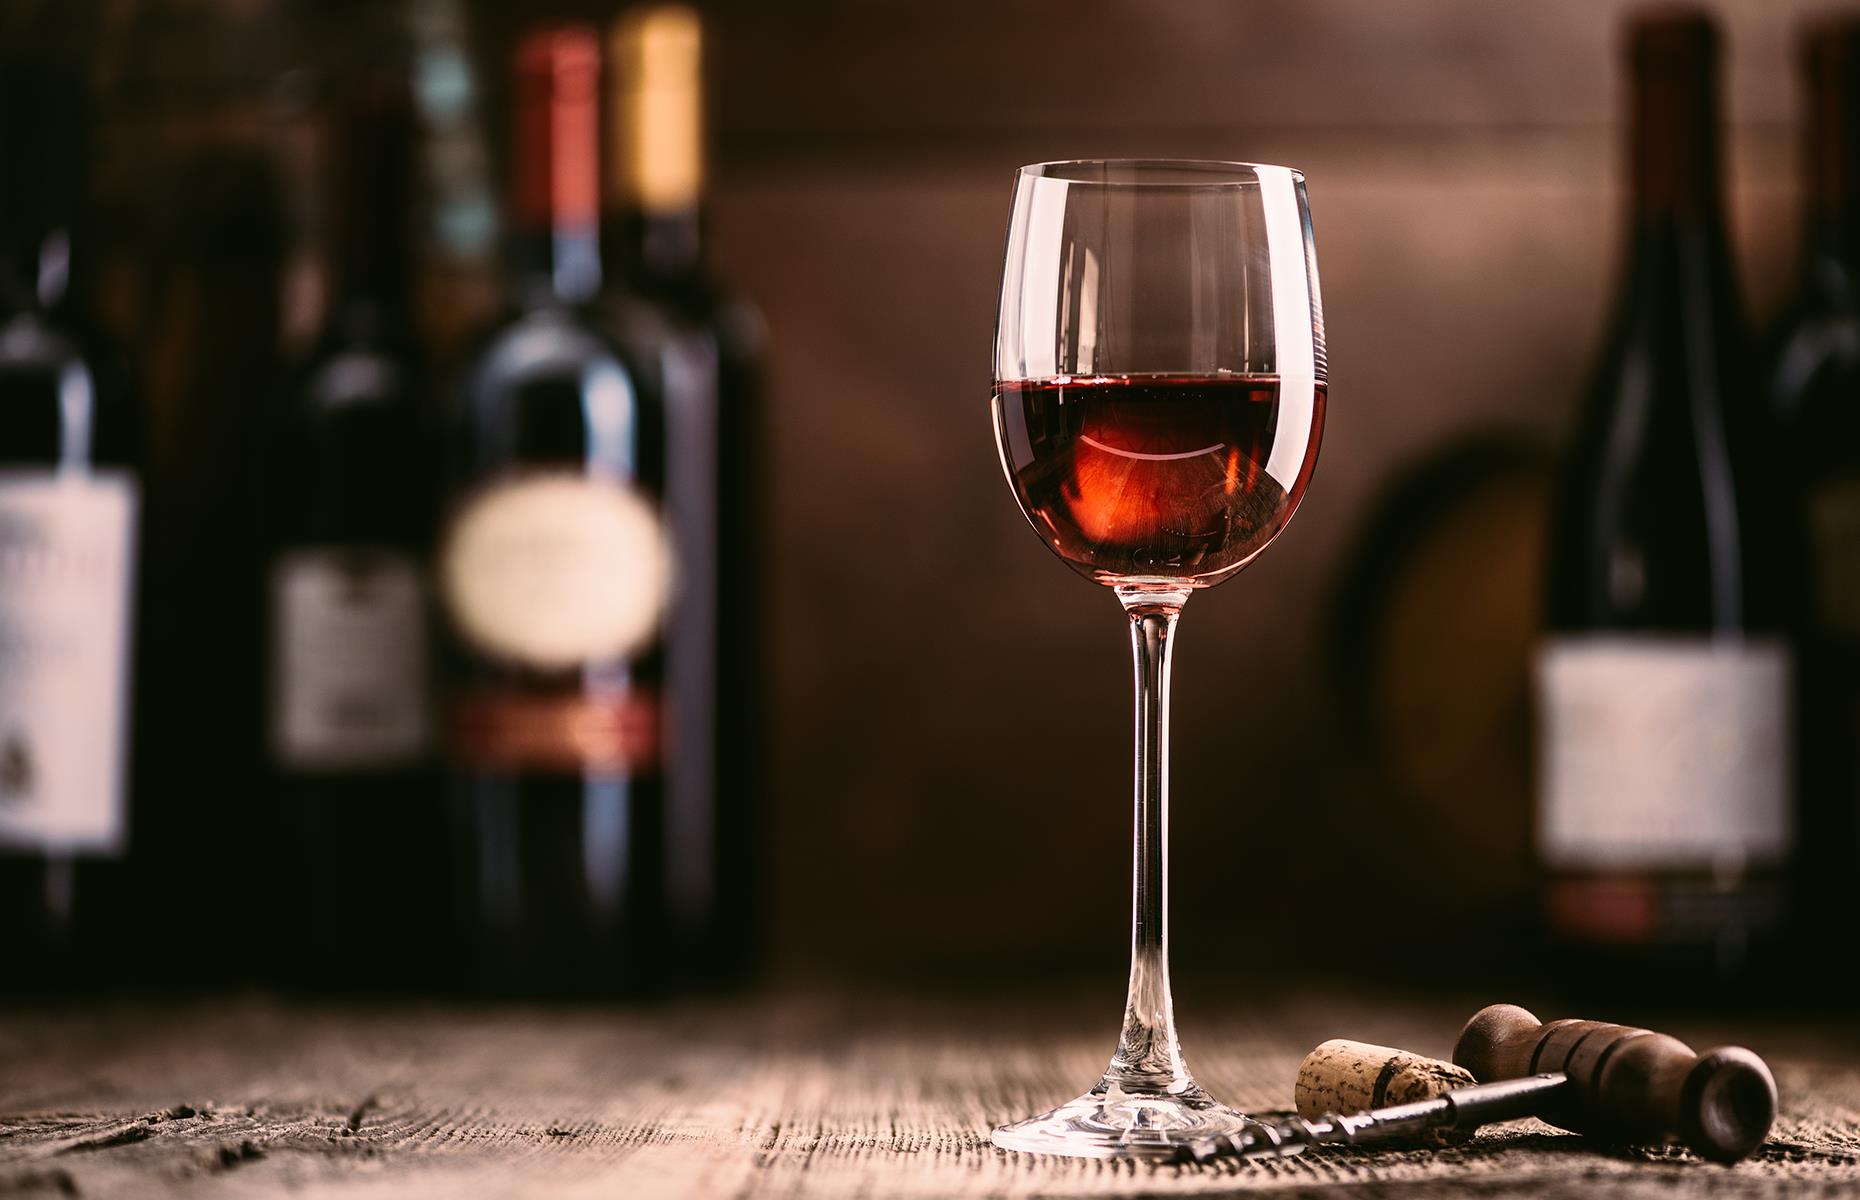 <p>Wine is enjoyed in almost every corner of the planet today, so it's little surprise that its early origins are hazy. Wine traces have been found in vessels from ancient China, but <a href="https://www.ancient.eu/article/944/wine-in-the-ancient-mediterranean/">it was in the Mediterranean</a> that the boozy drink truly flourished in antiquity. The millennia-old drink appears in Greek mythology, was used in both ancient Greek and Roman religious ceremonies, and was also supped at informal get-togethers known as symposiums. It soon gained popularity in ancient Egypt and Mesopotamia too. </p>